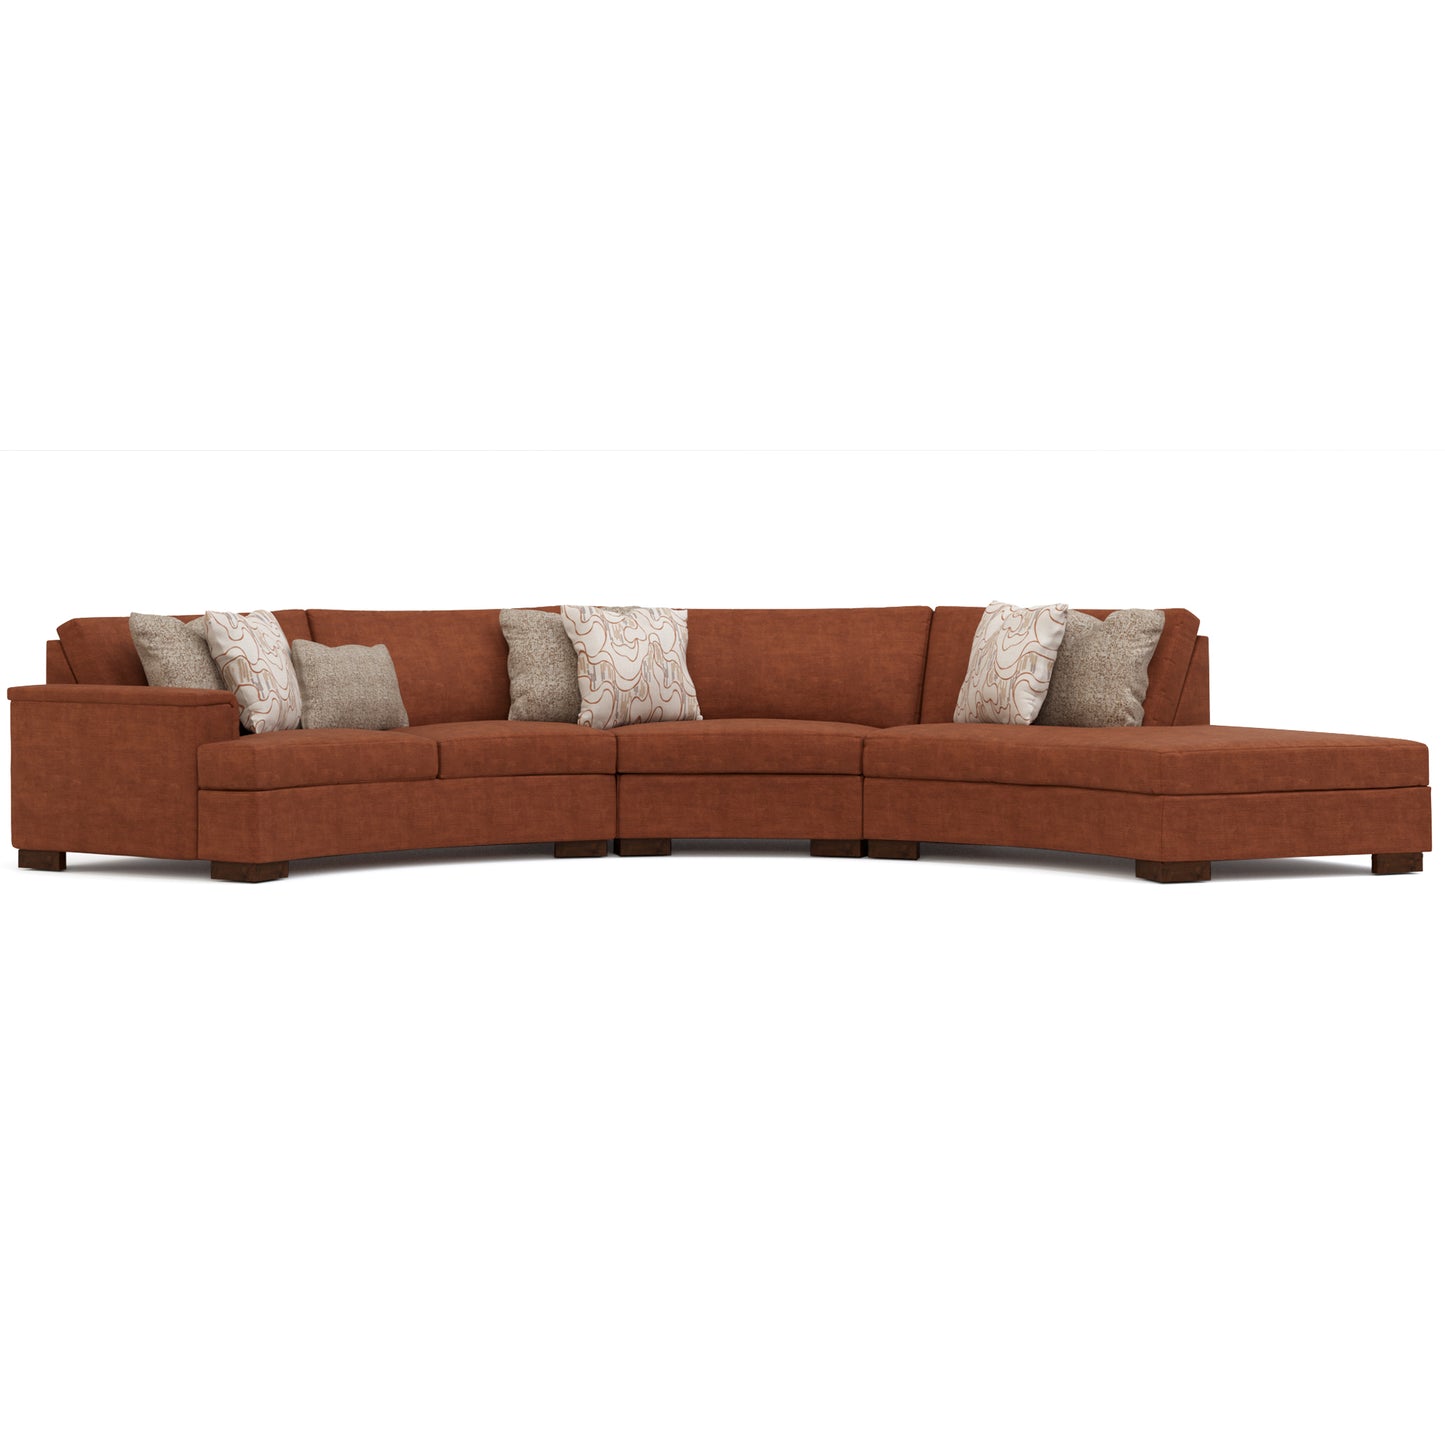 Hayward Large Curved Sectional